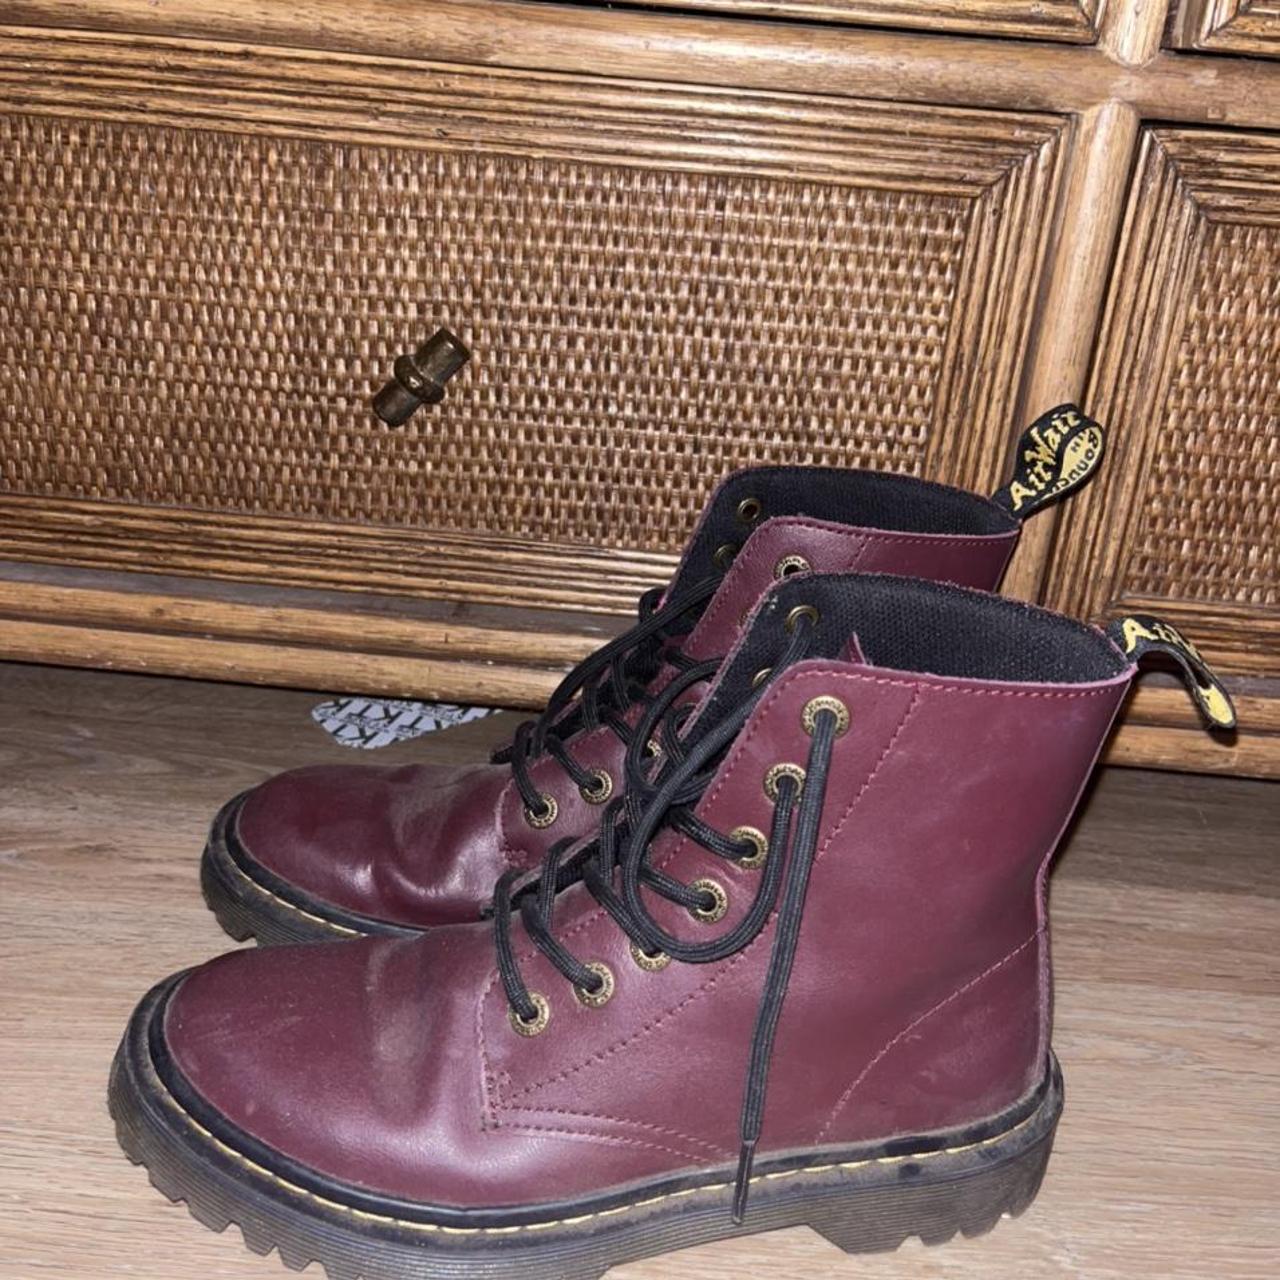 & Other Stories Women's Burgundy Boots